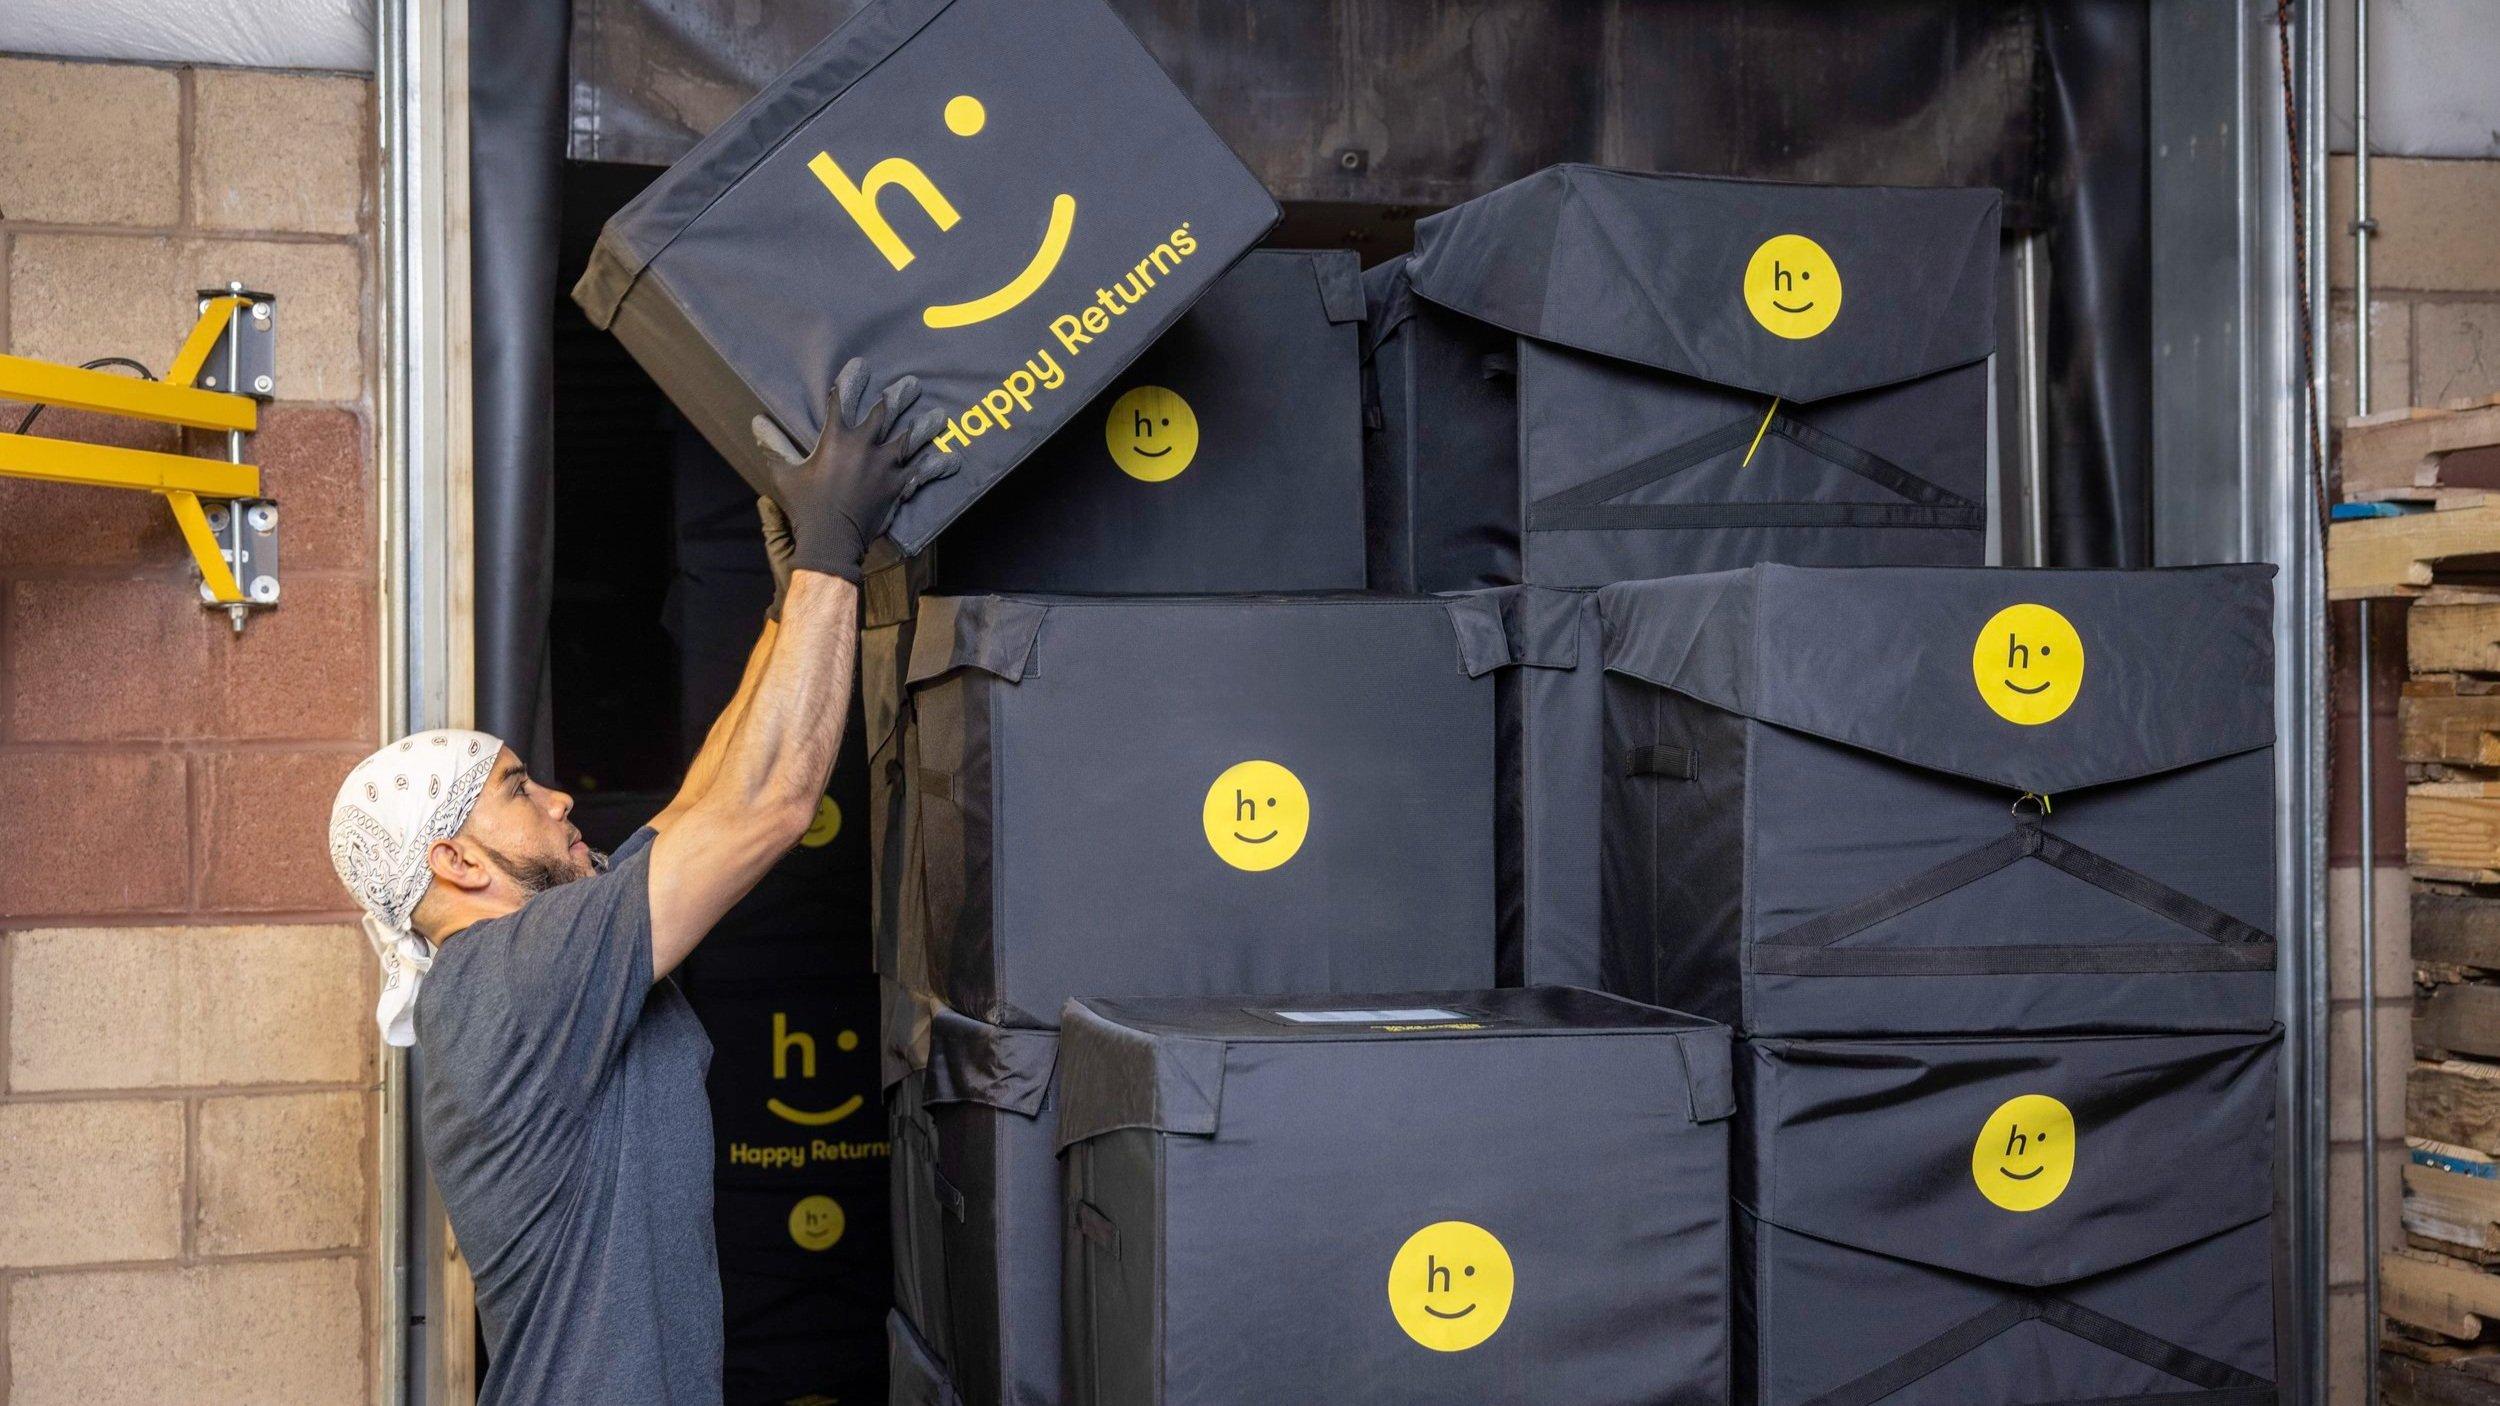 Hub warehouse employee stacking reusable totes for transfer